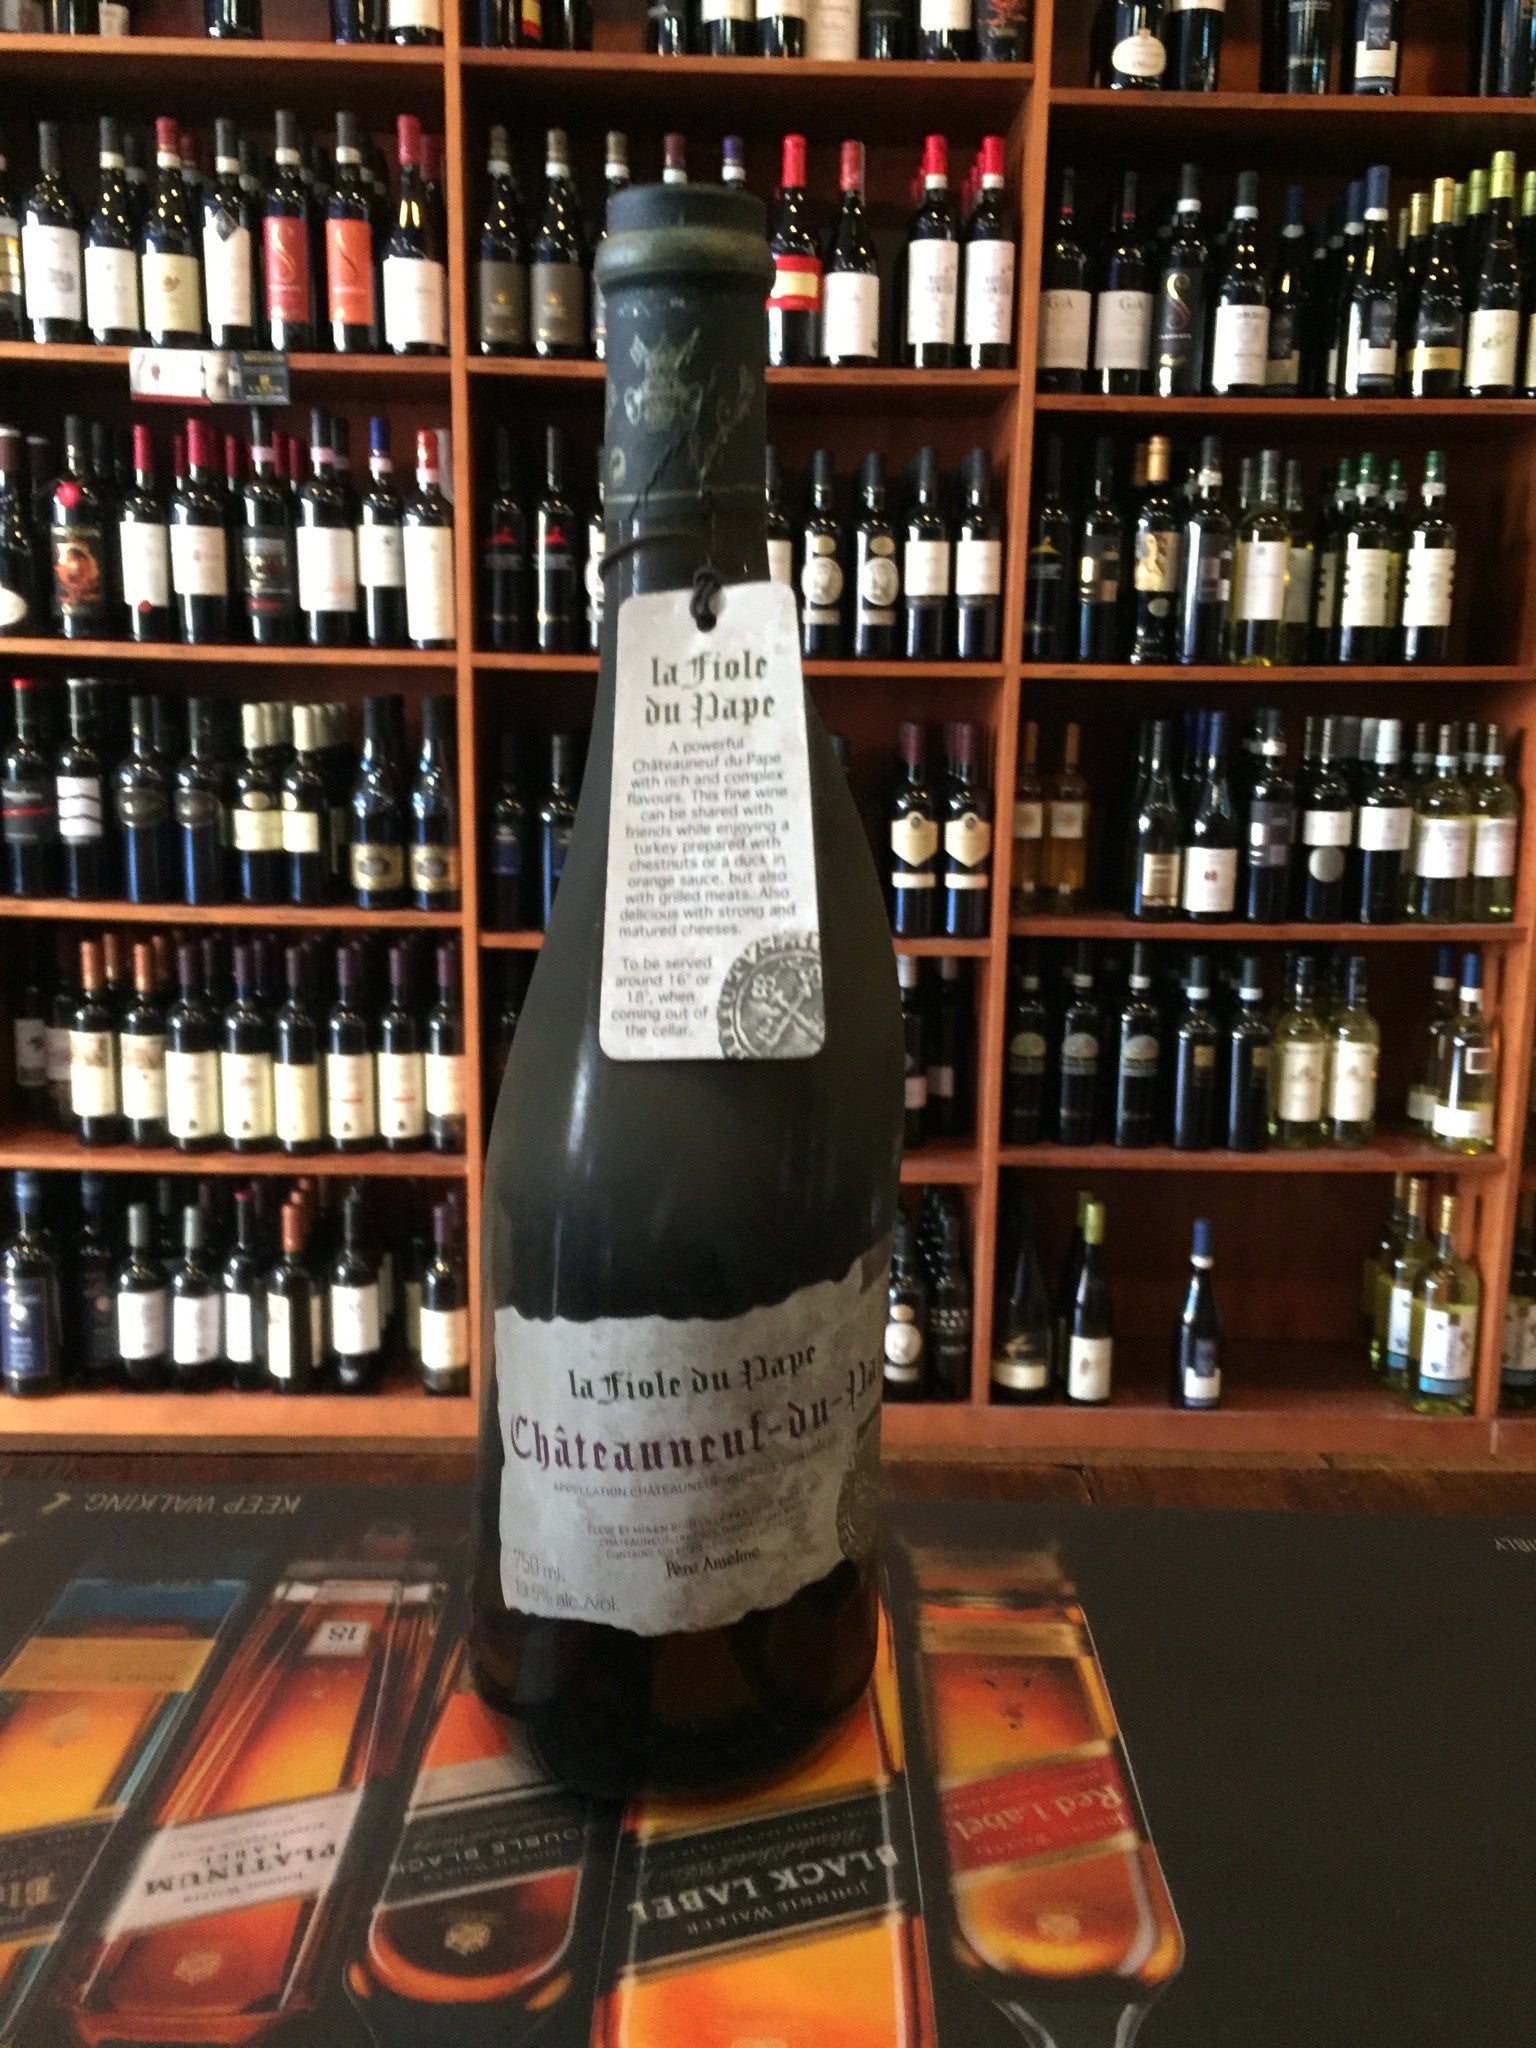 Chateauneuf du Pape Dirty bottle